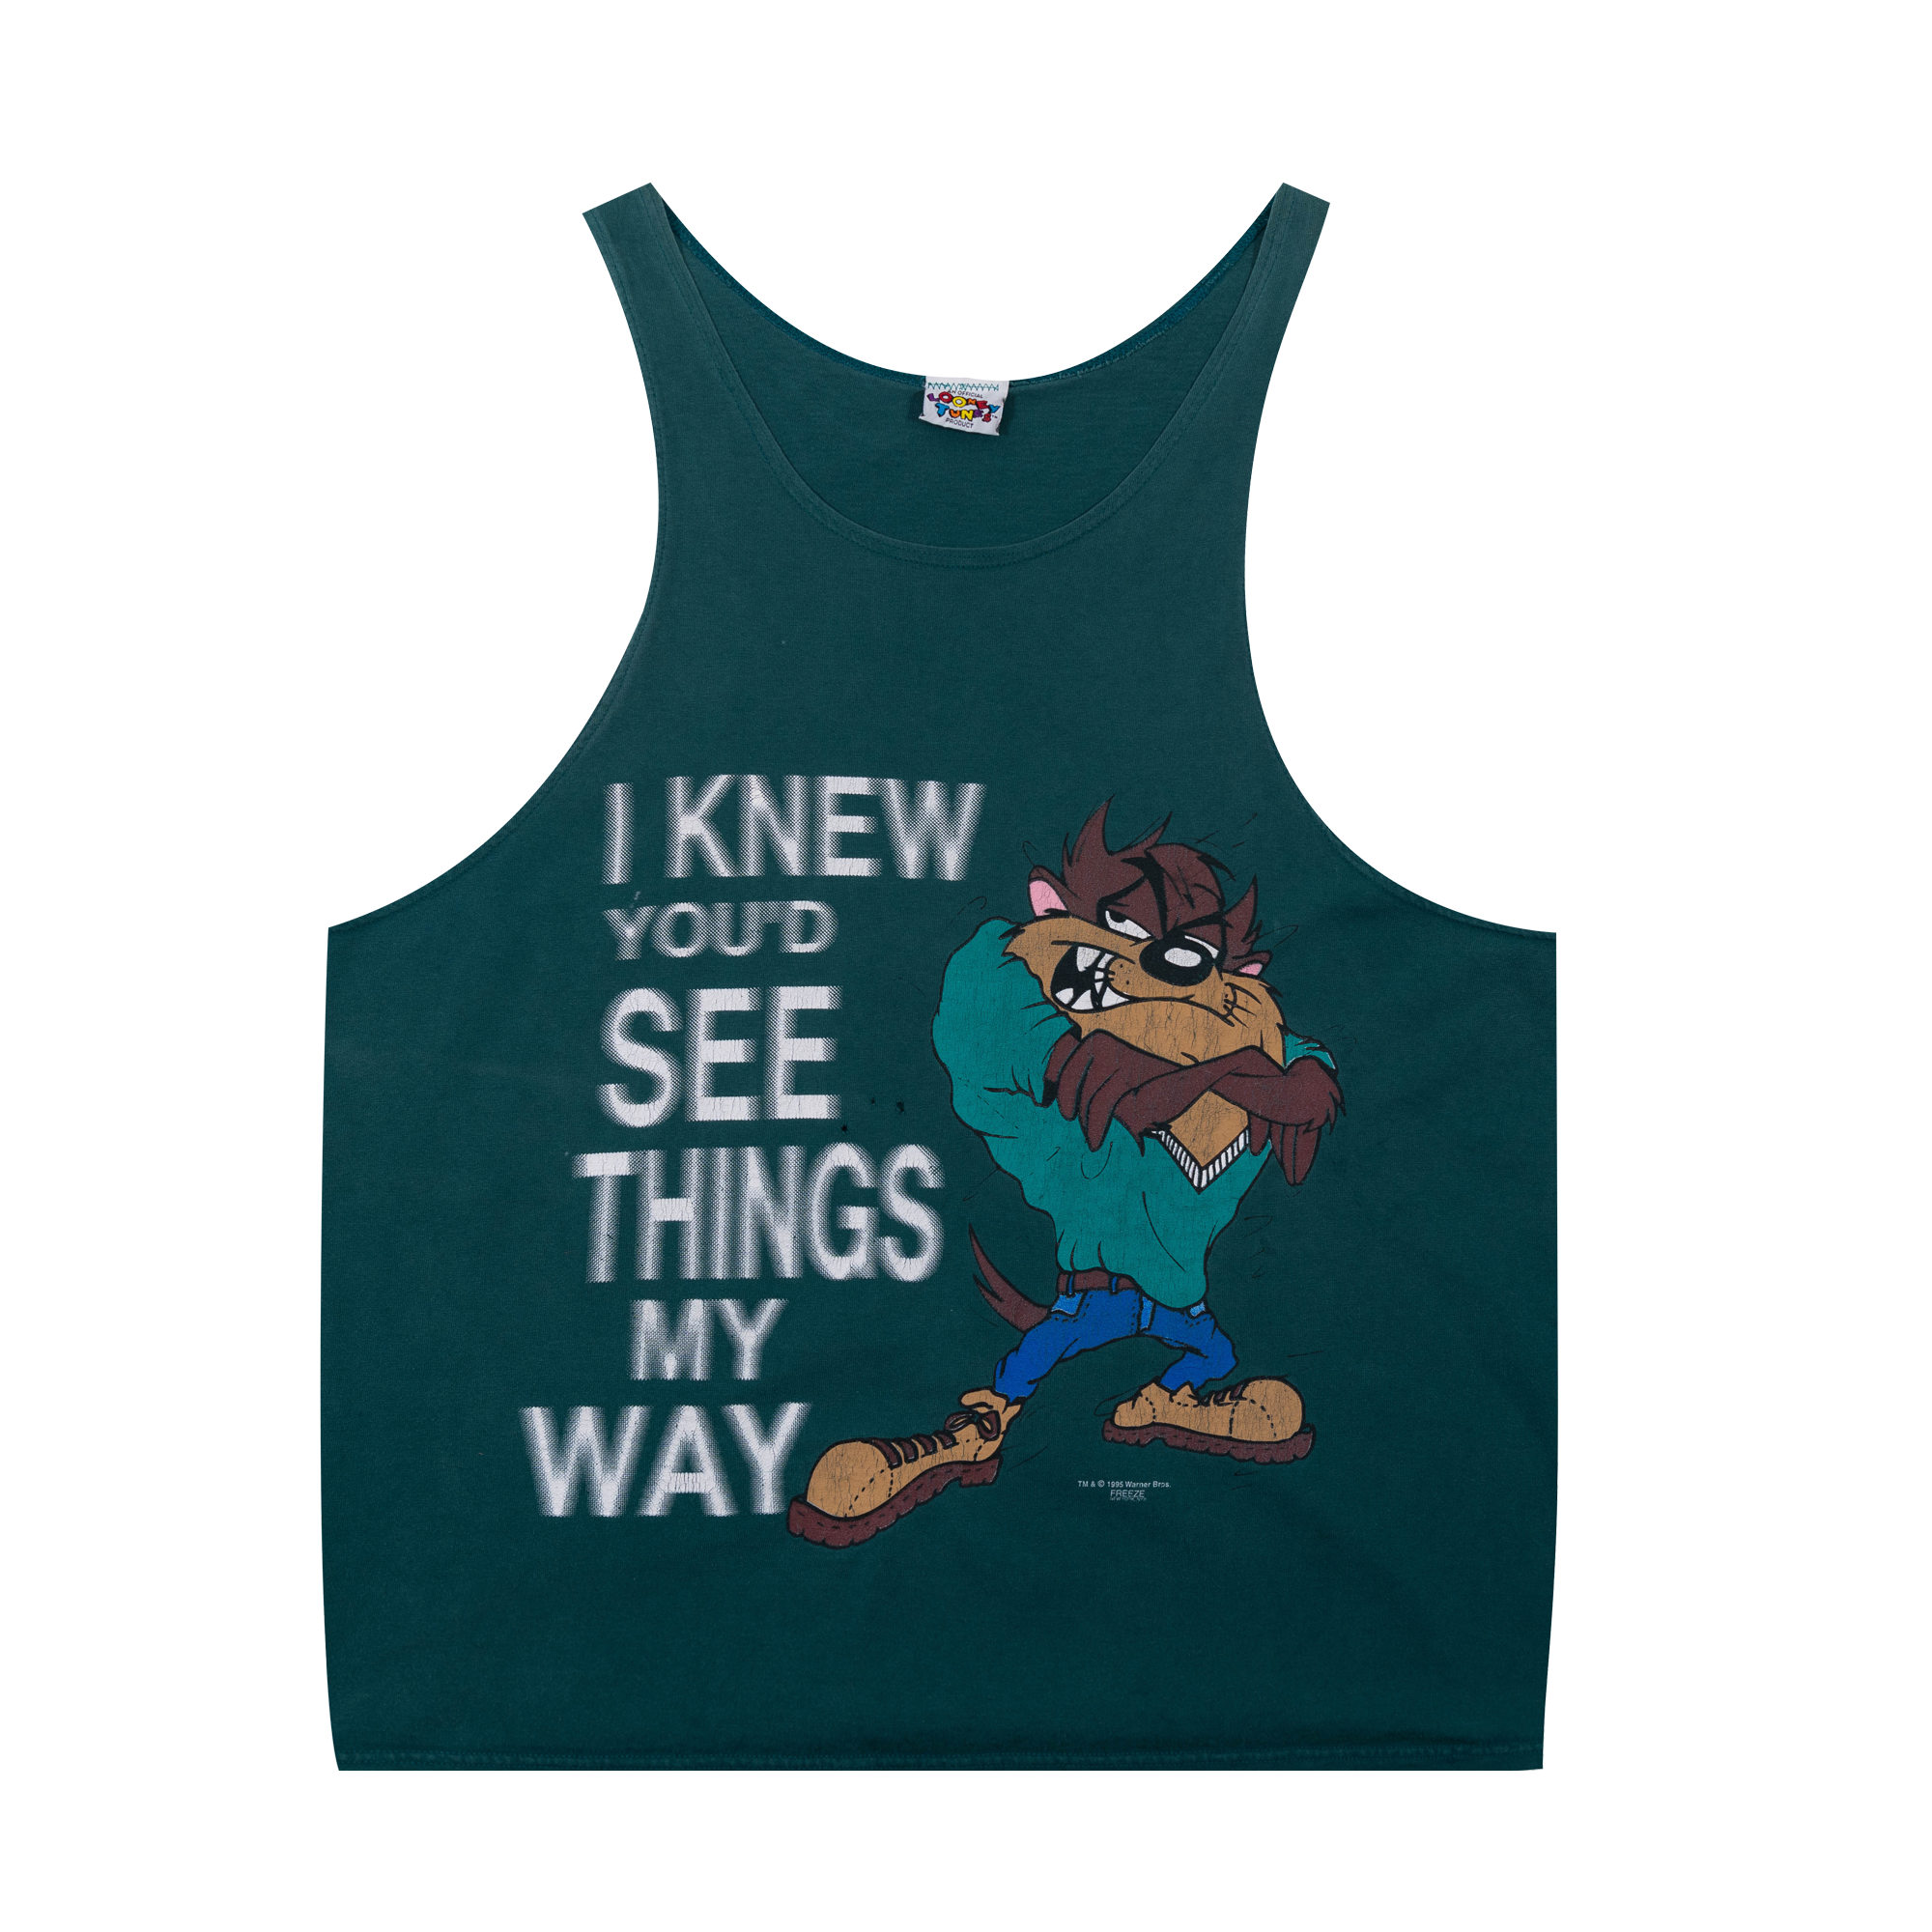 Taz Looney Tunes "I Knew You'd See" 1995 Tank Top Green-PLUS